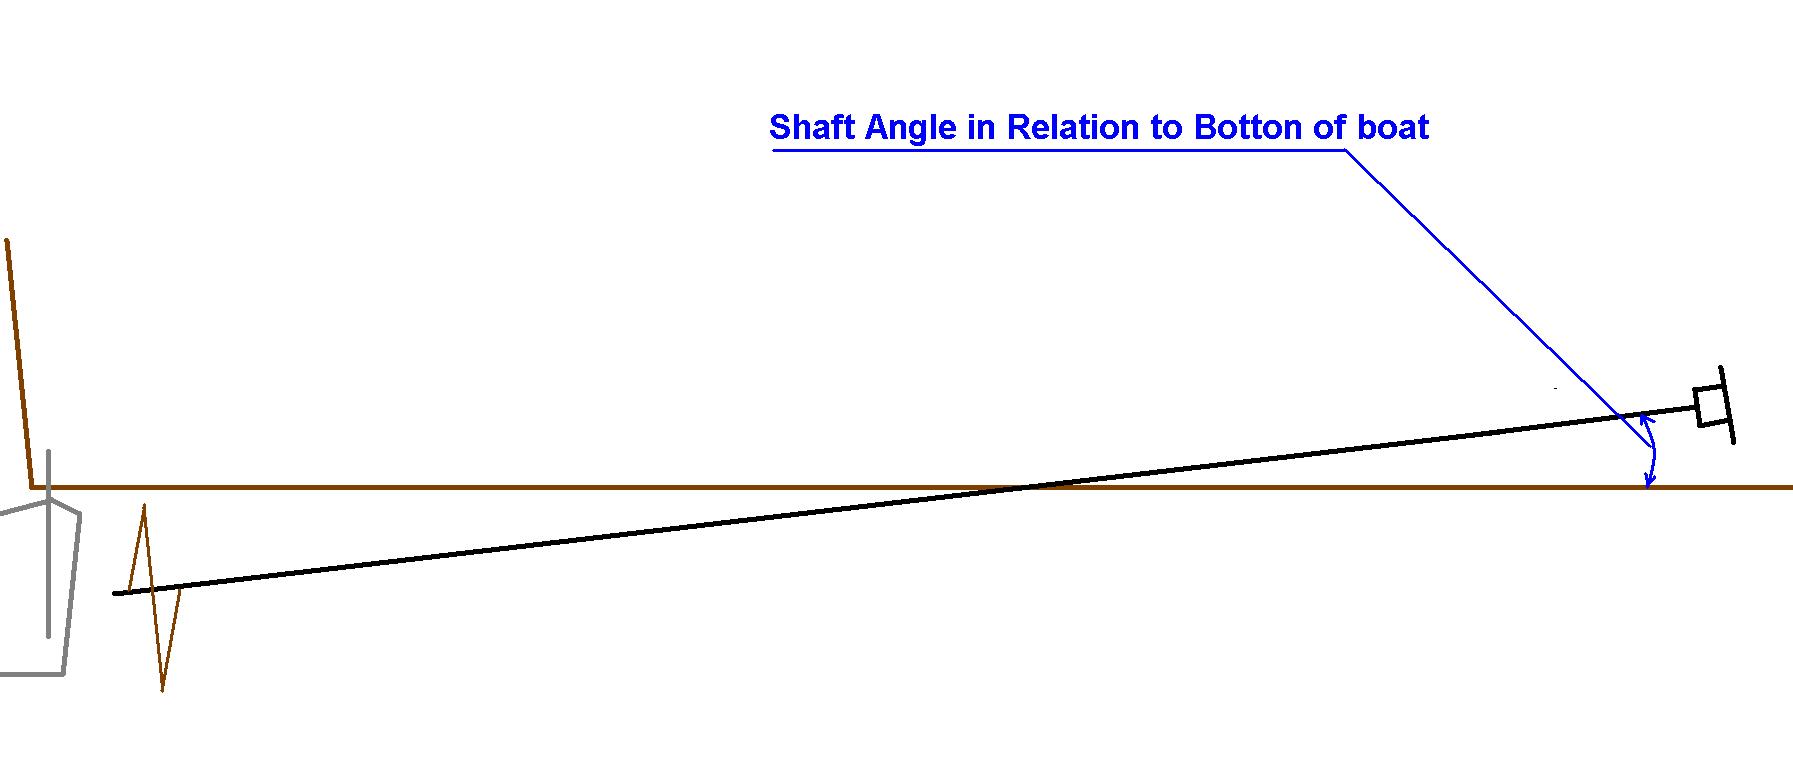 Shaft Angle in Relation to the Bottom of the Boat